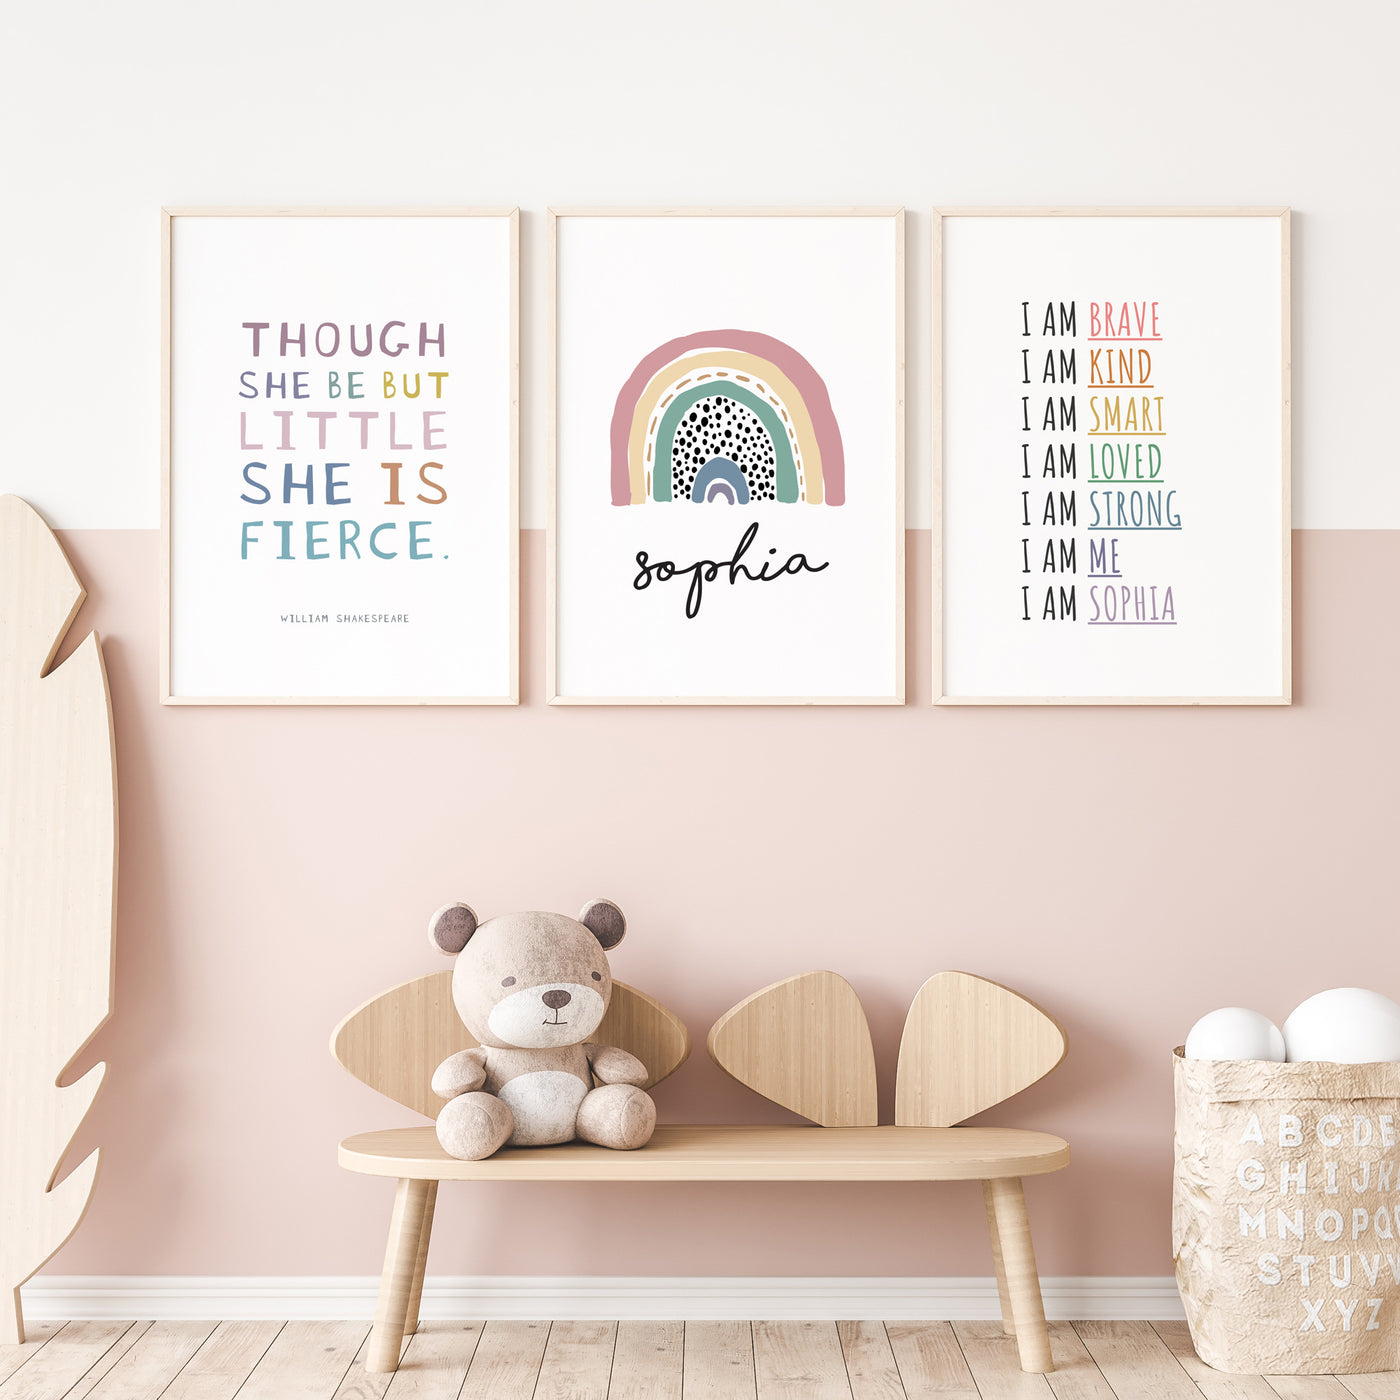 'Though She Be But Little, She Is Fierce' Print